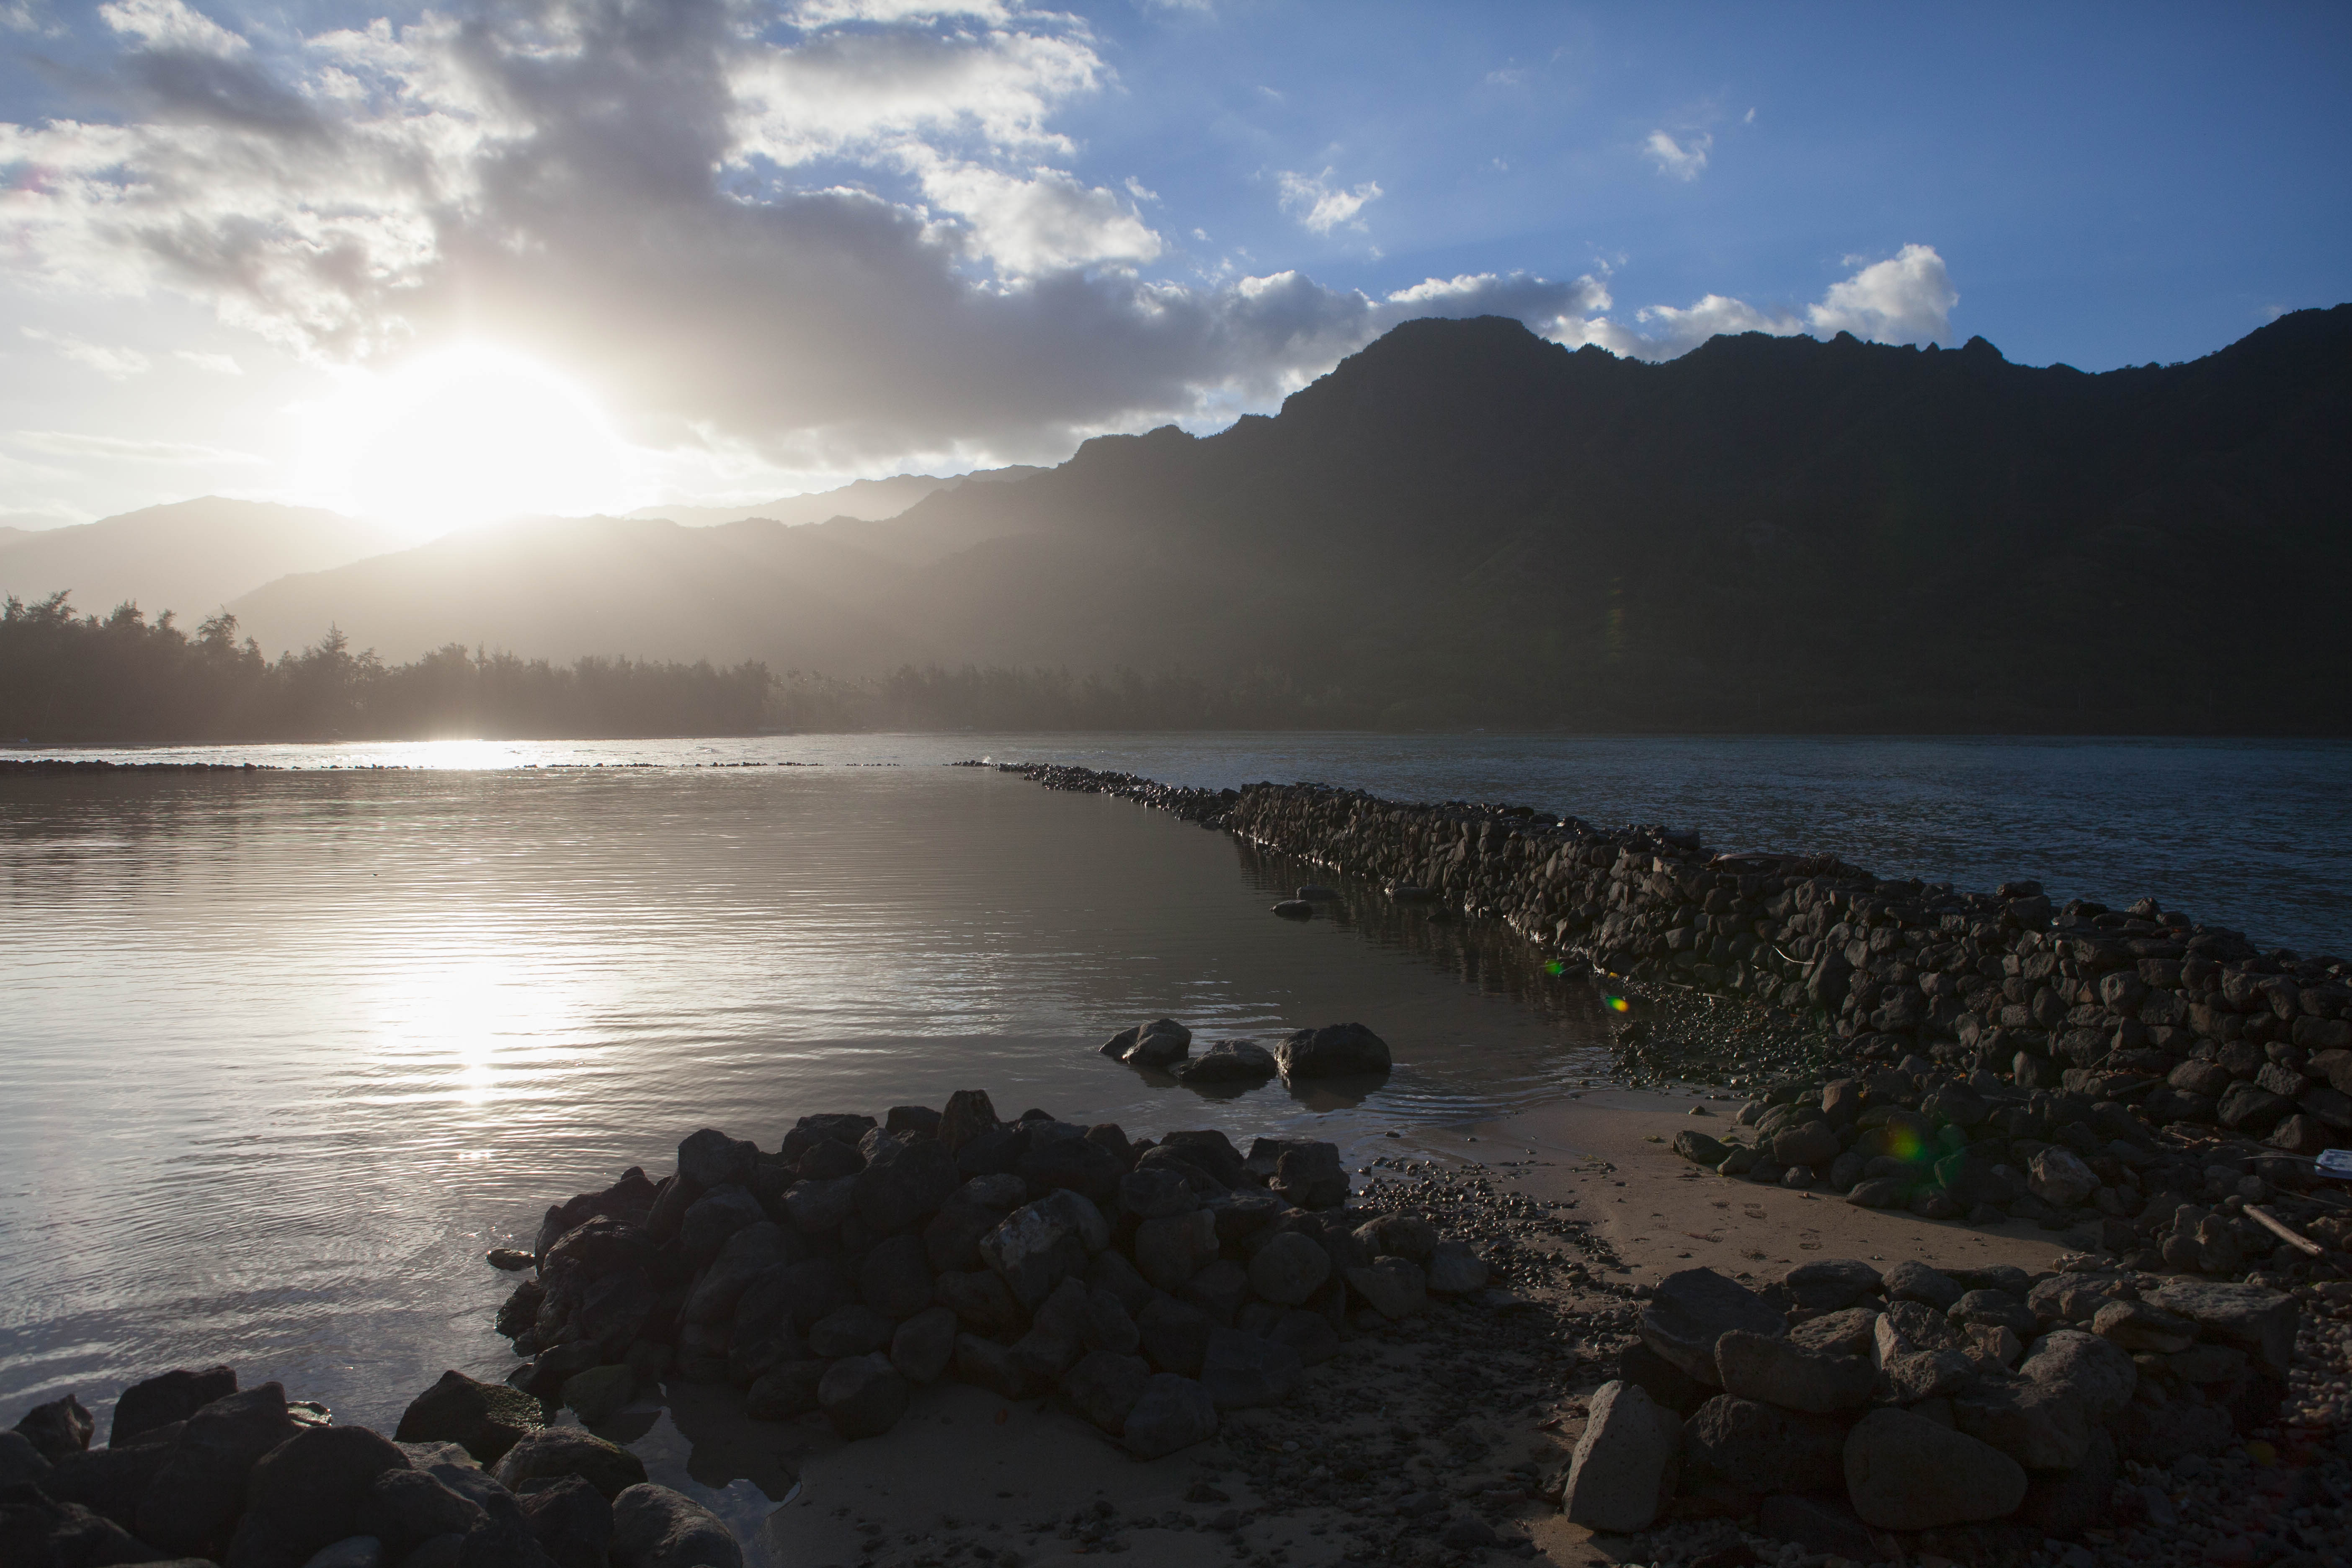 Huilua Fishpond in Kahana Bay: Explore the beauty and history of ancient Hawaii fishing practices